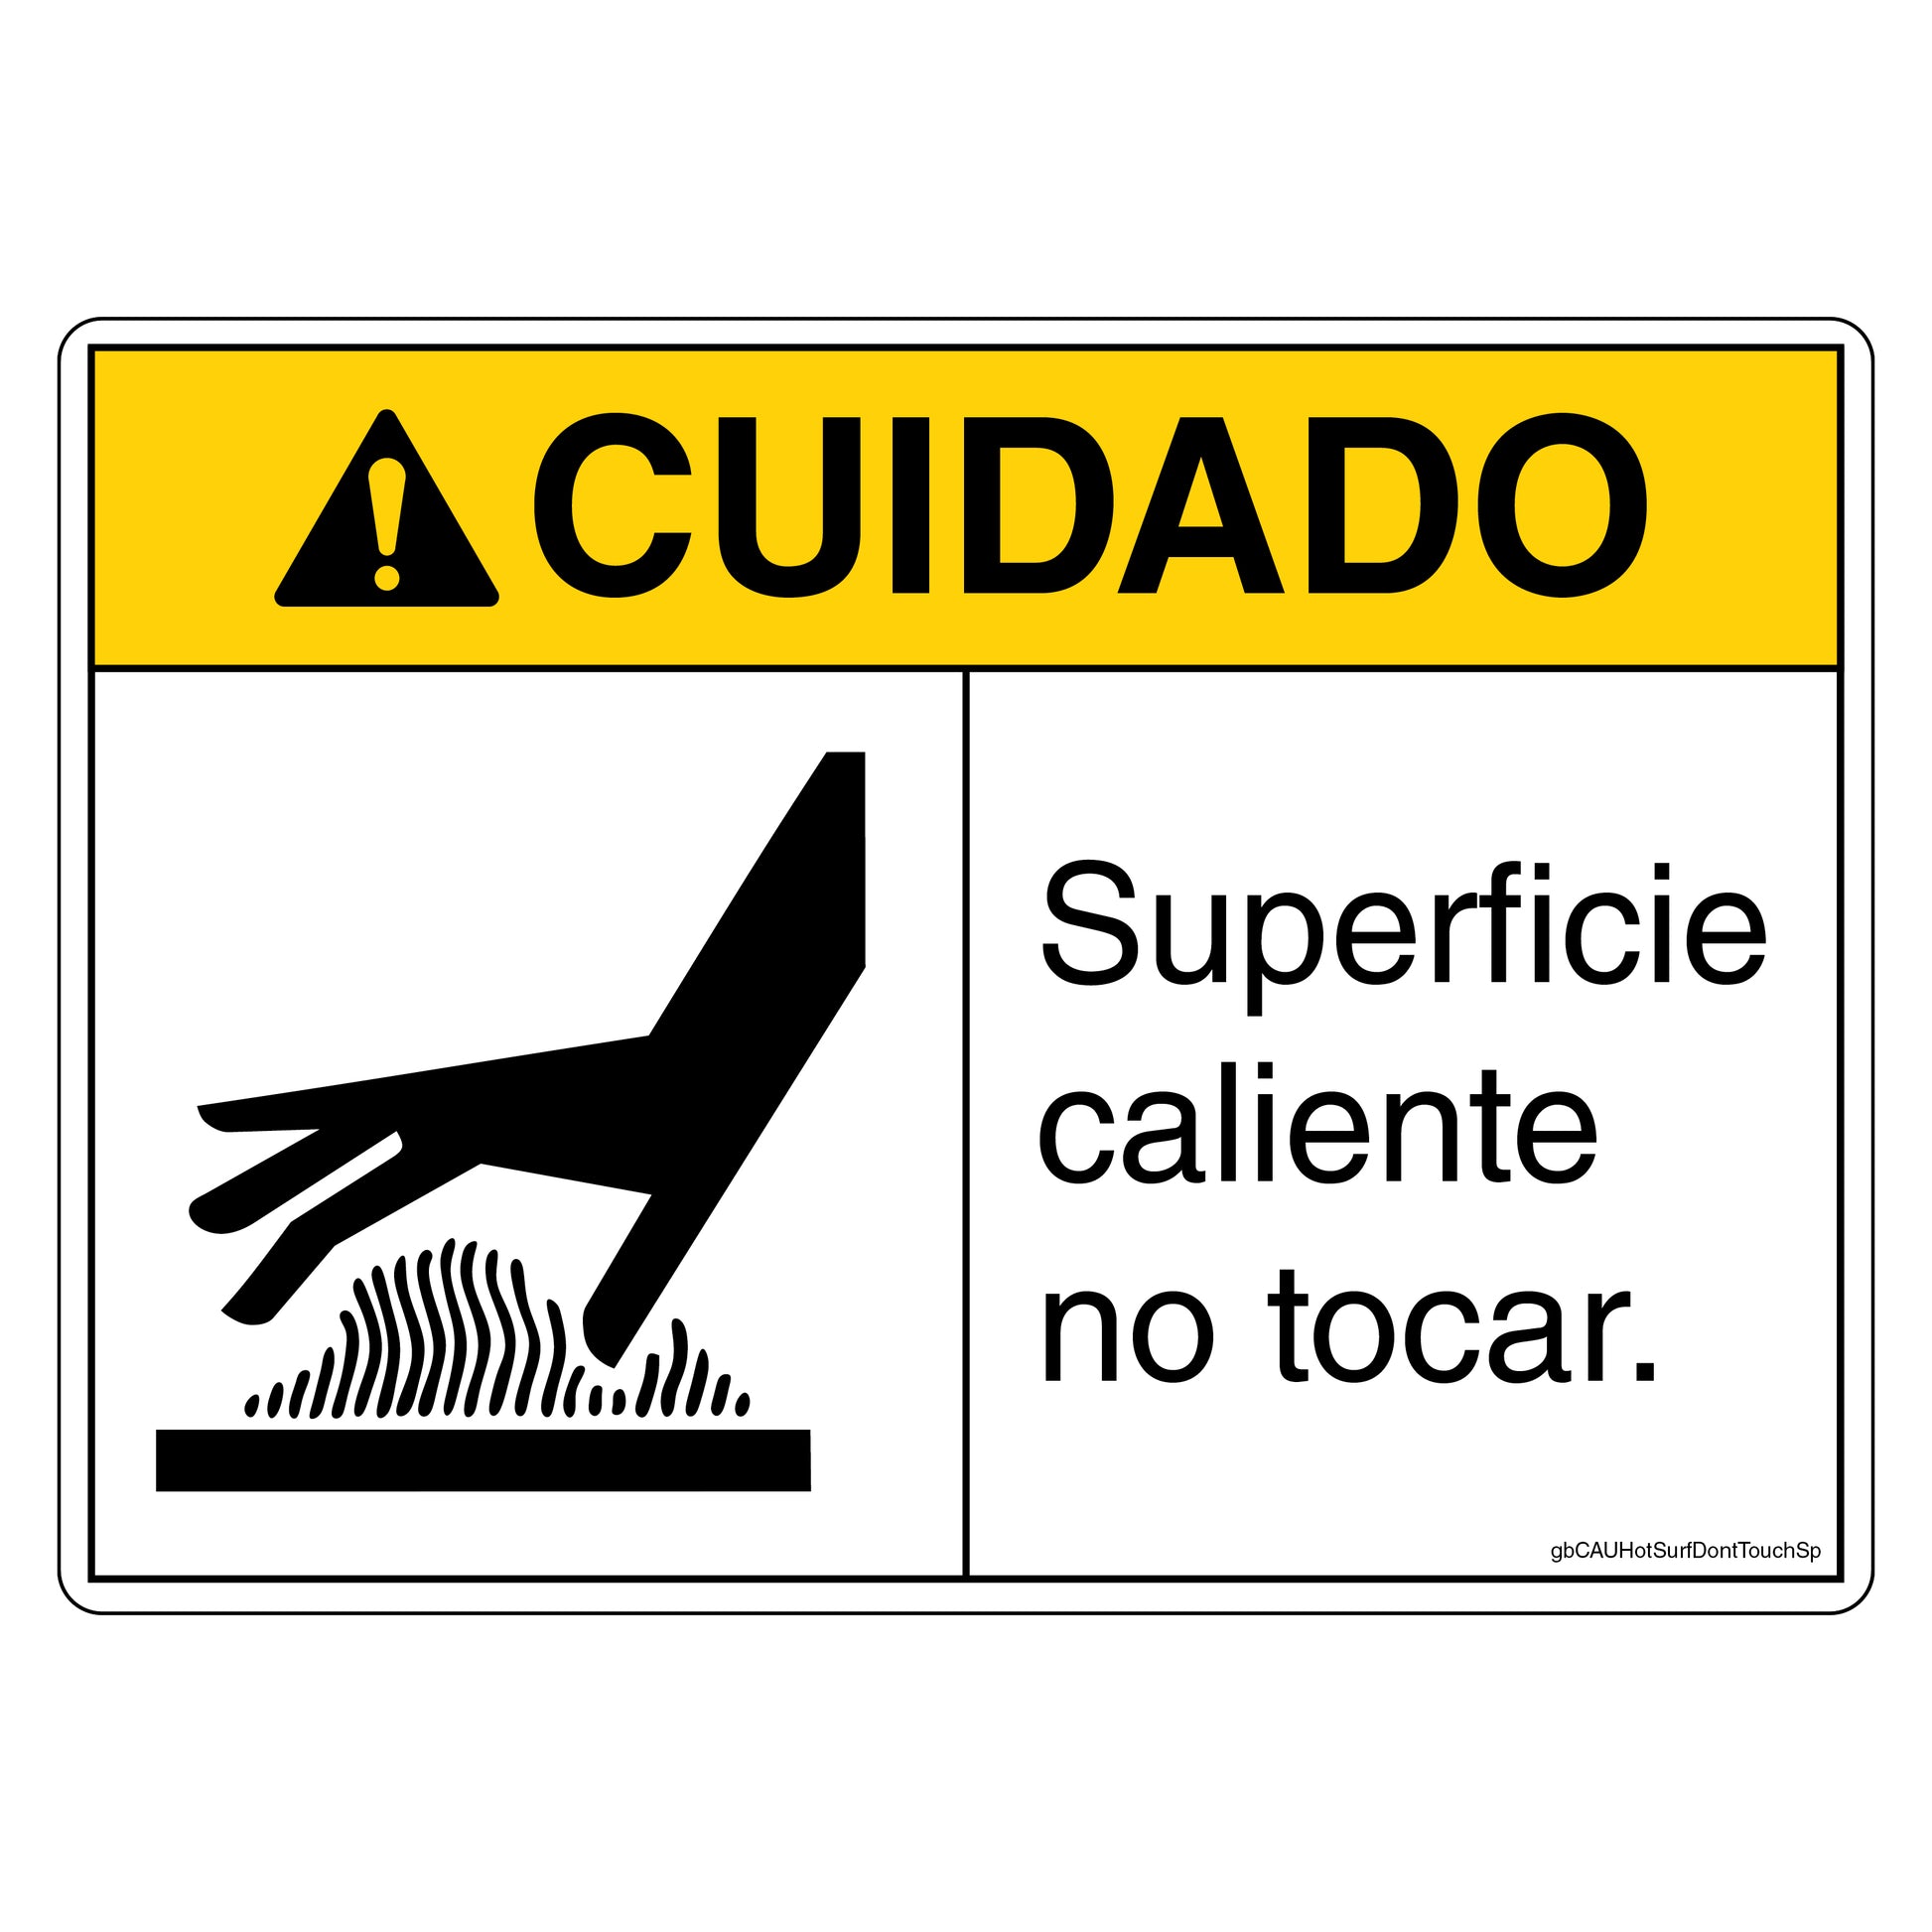 Cuidado Superficie Caliente No Tacar Decal - Hot Surface Do Not Touch Decal in Spanish.